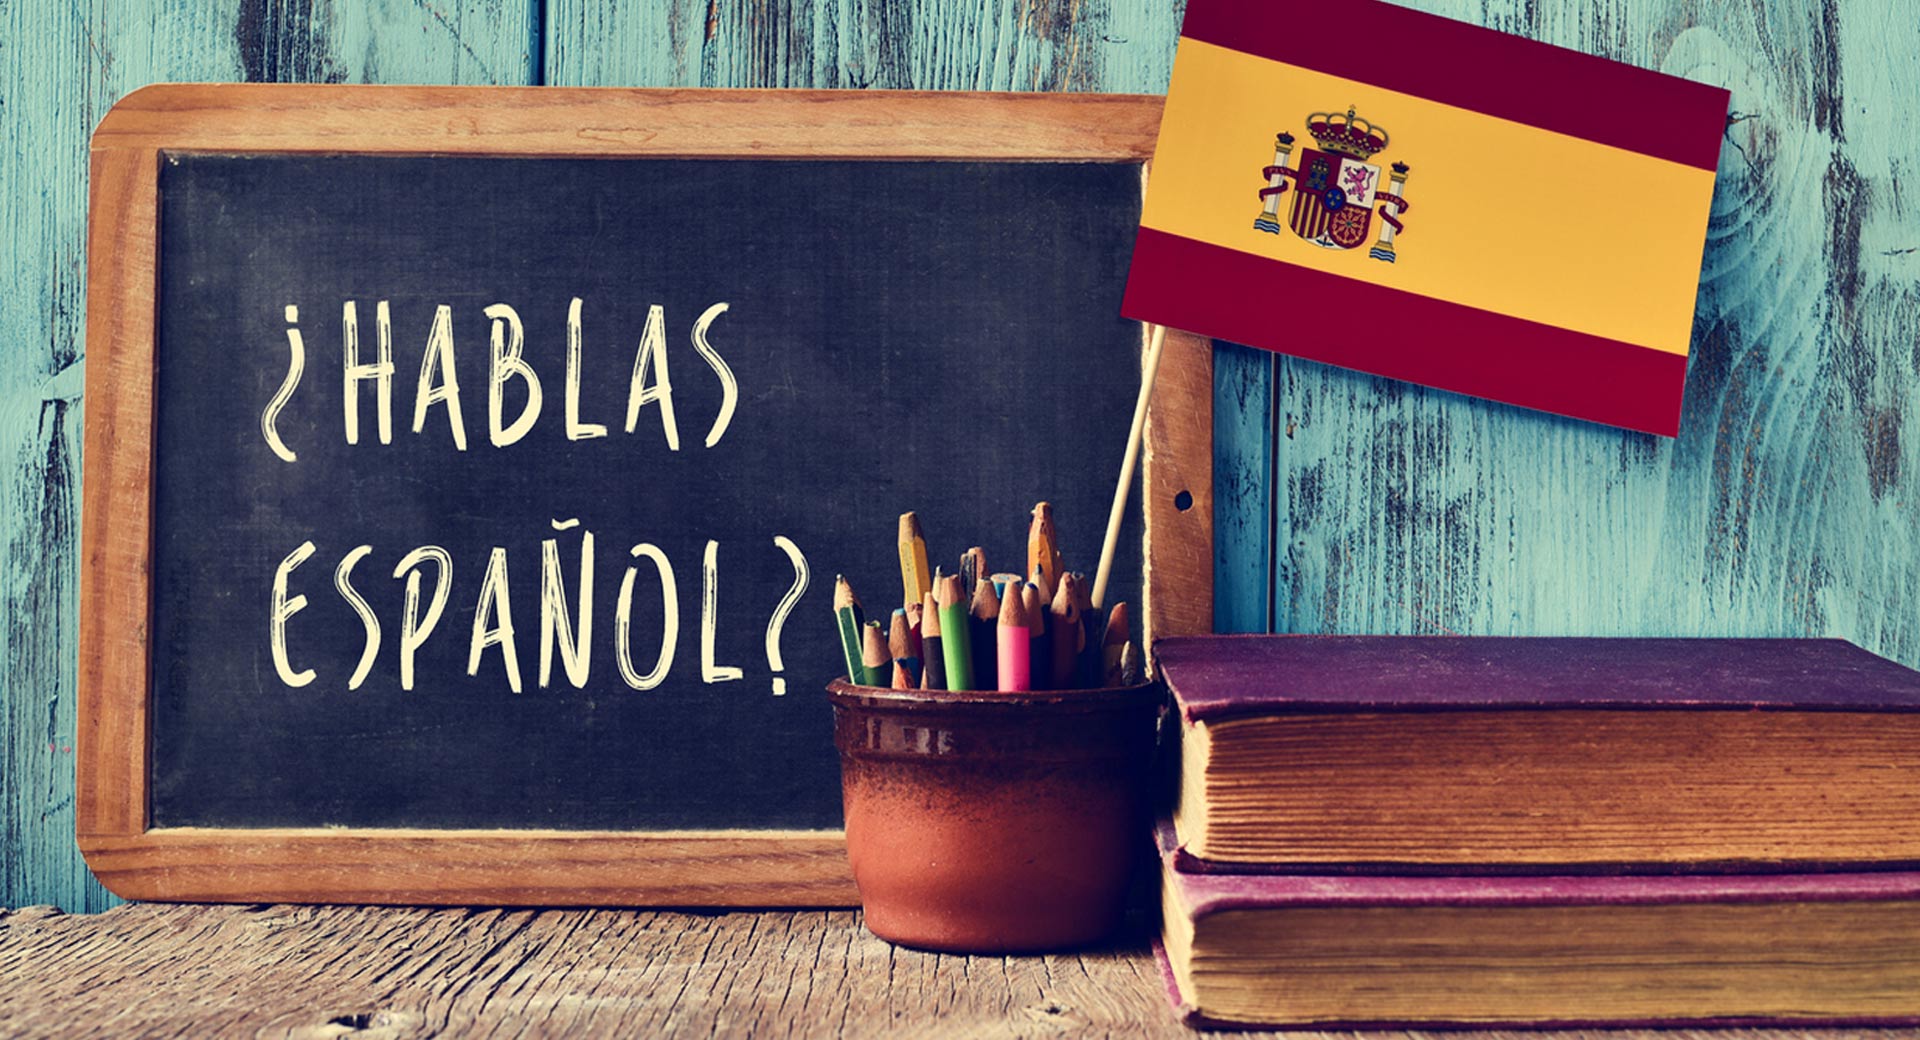 An image of the Spanish flag and a blackboard that says "Do you speak Spanish" in Spanish with some books